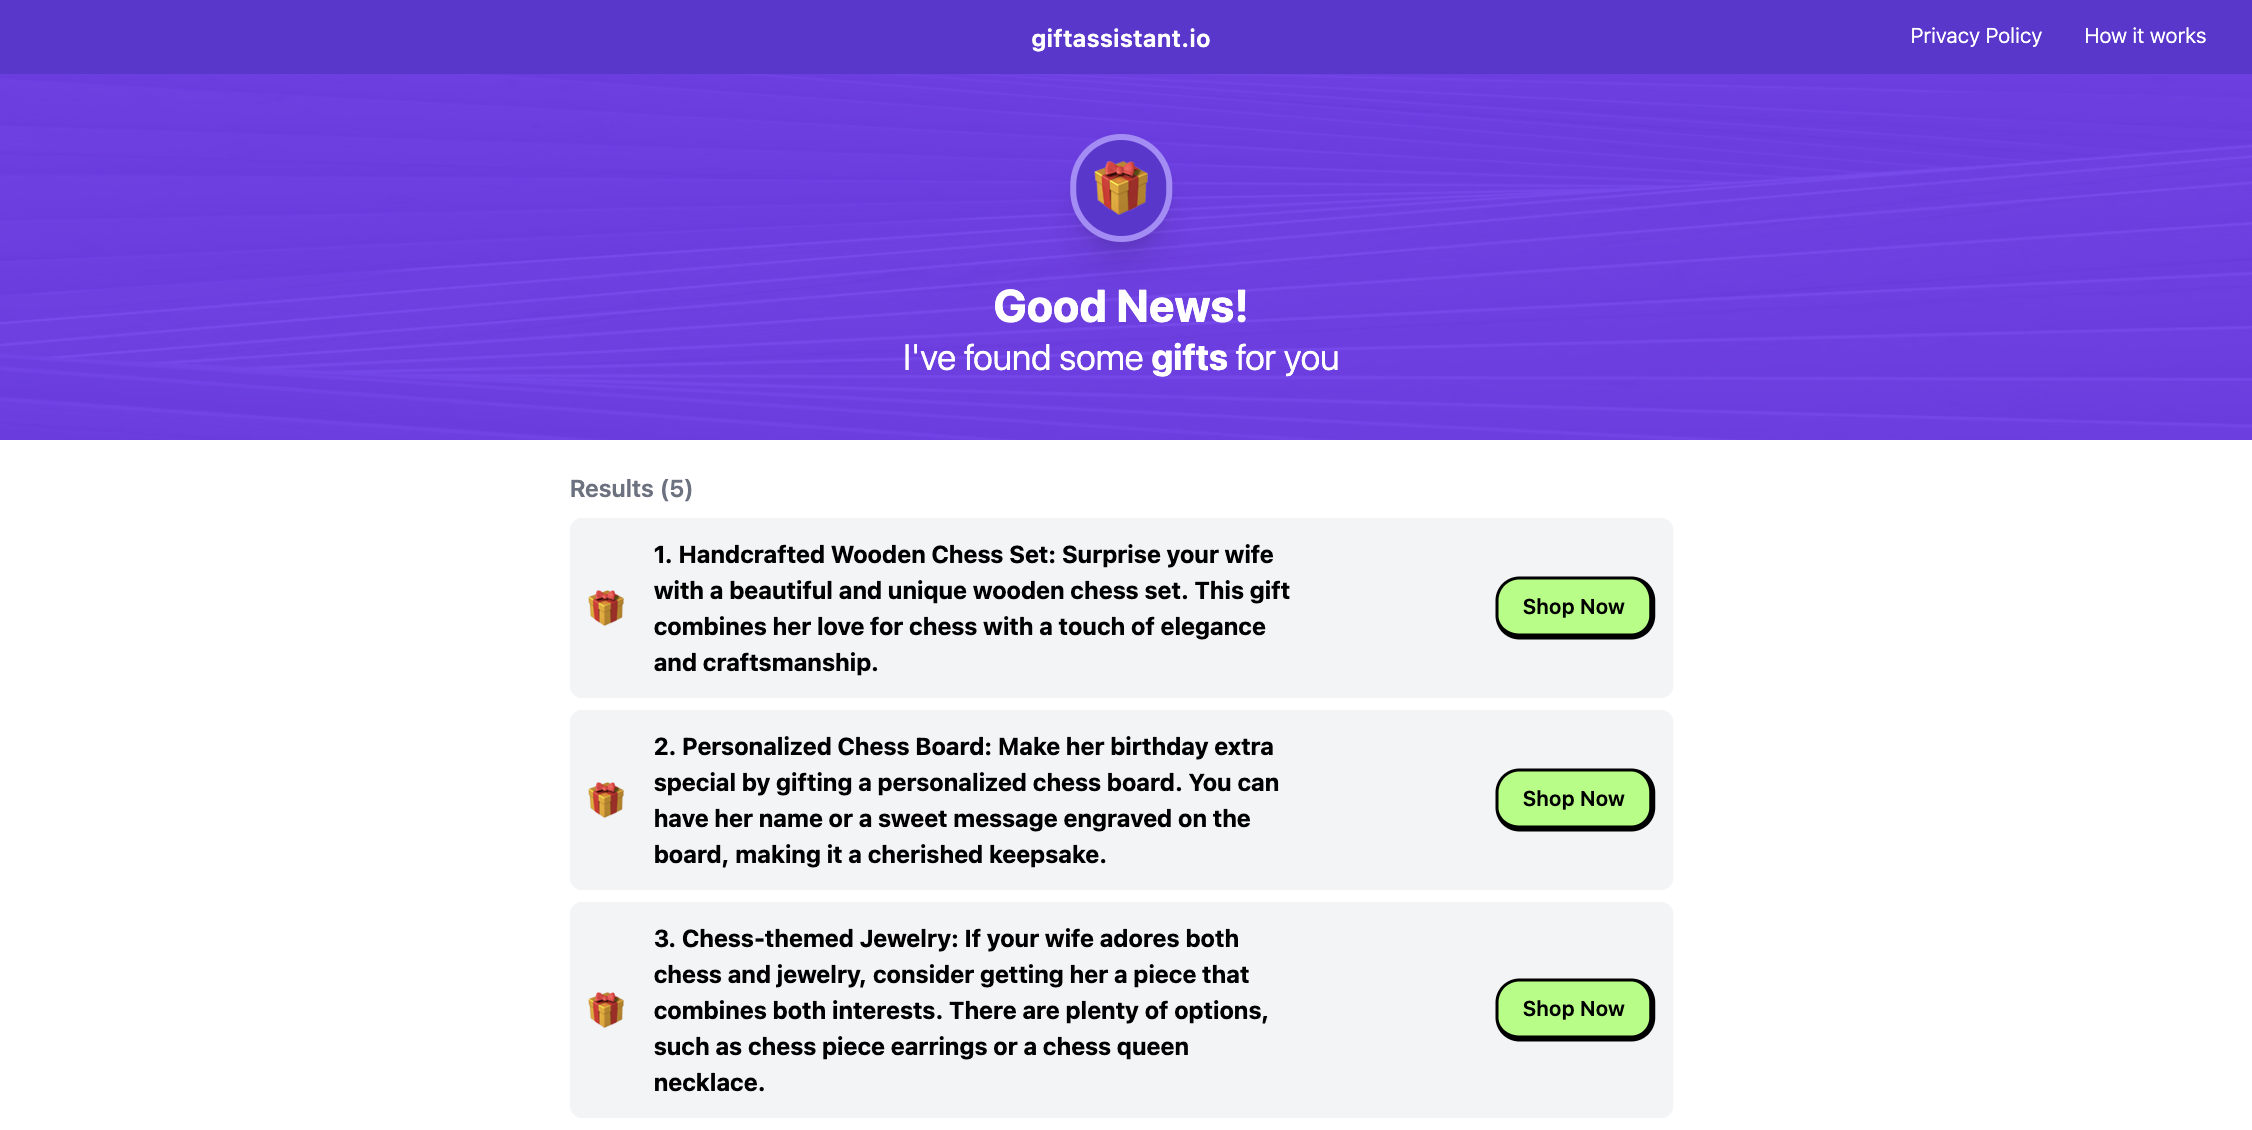 Giftassistant.io redirected and suggested gift ideas